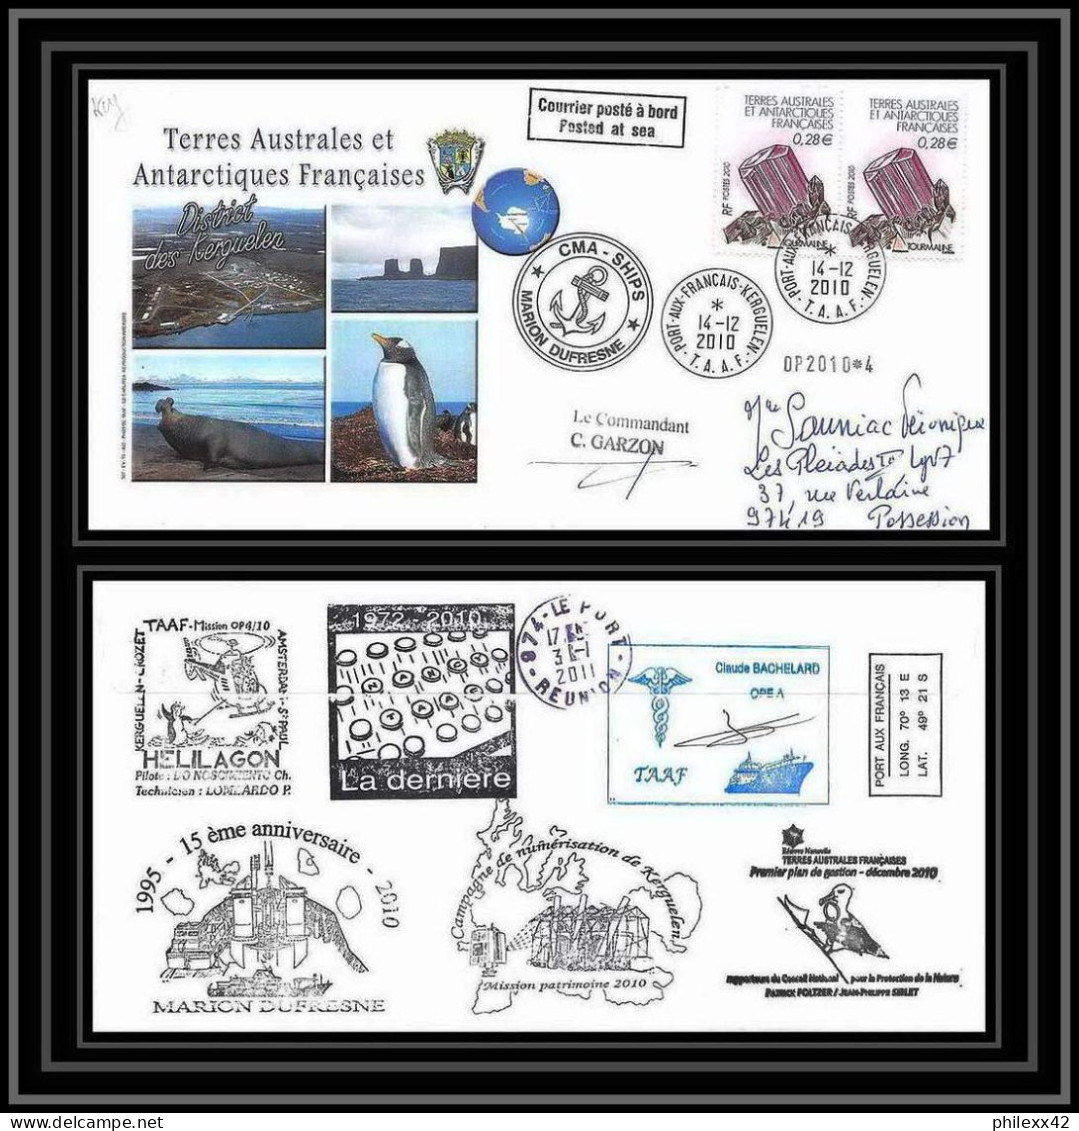 3059 Helilagon Dufresne Signé Signed Op 2010/4 Kerguelen 14/12/2010 N°556 ANTARCTIC Terres Australes (taaf) Lettre Cover - Helicopters